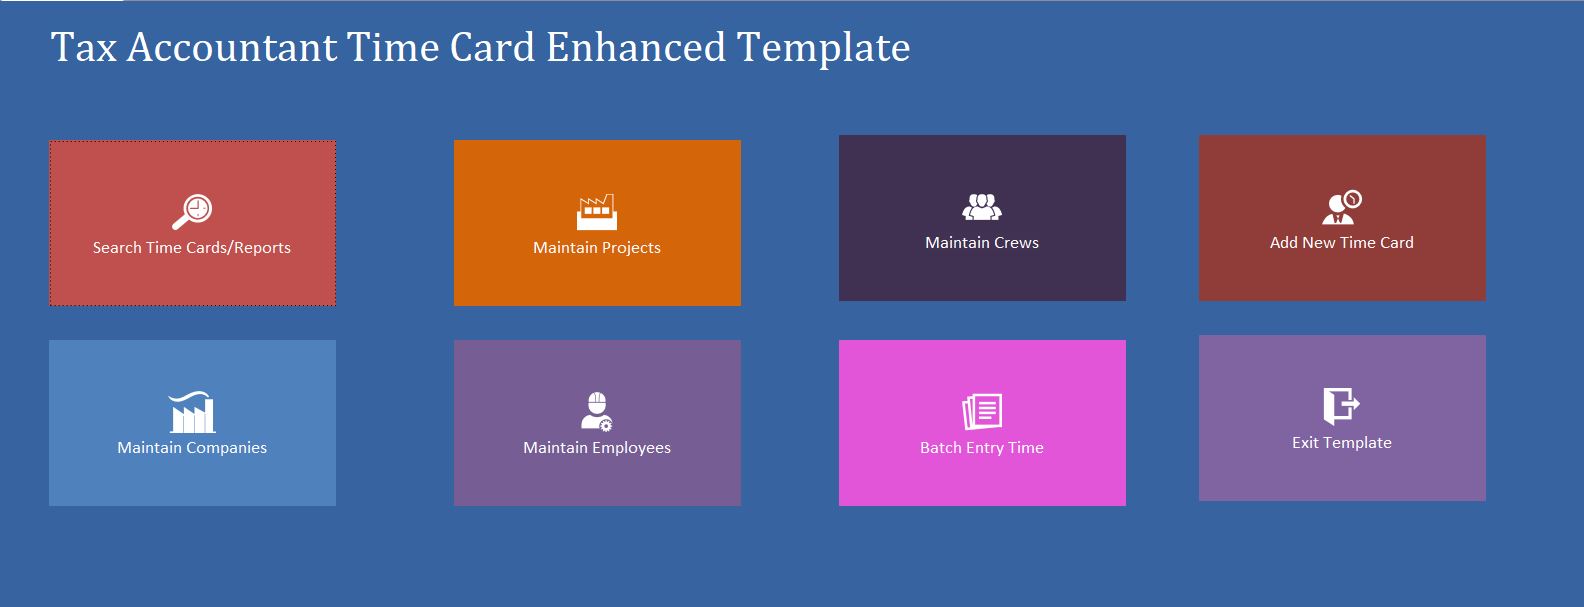 Enhanced Tax Accountant Time Card Template | Time Card Database